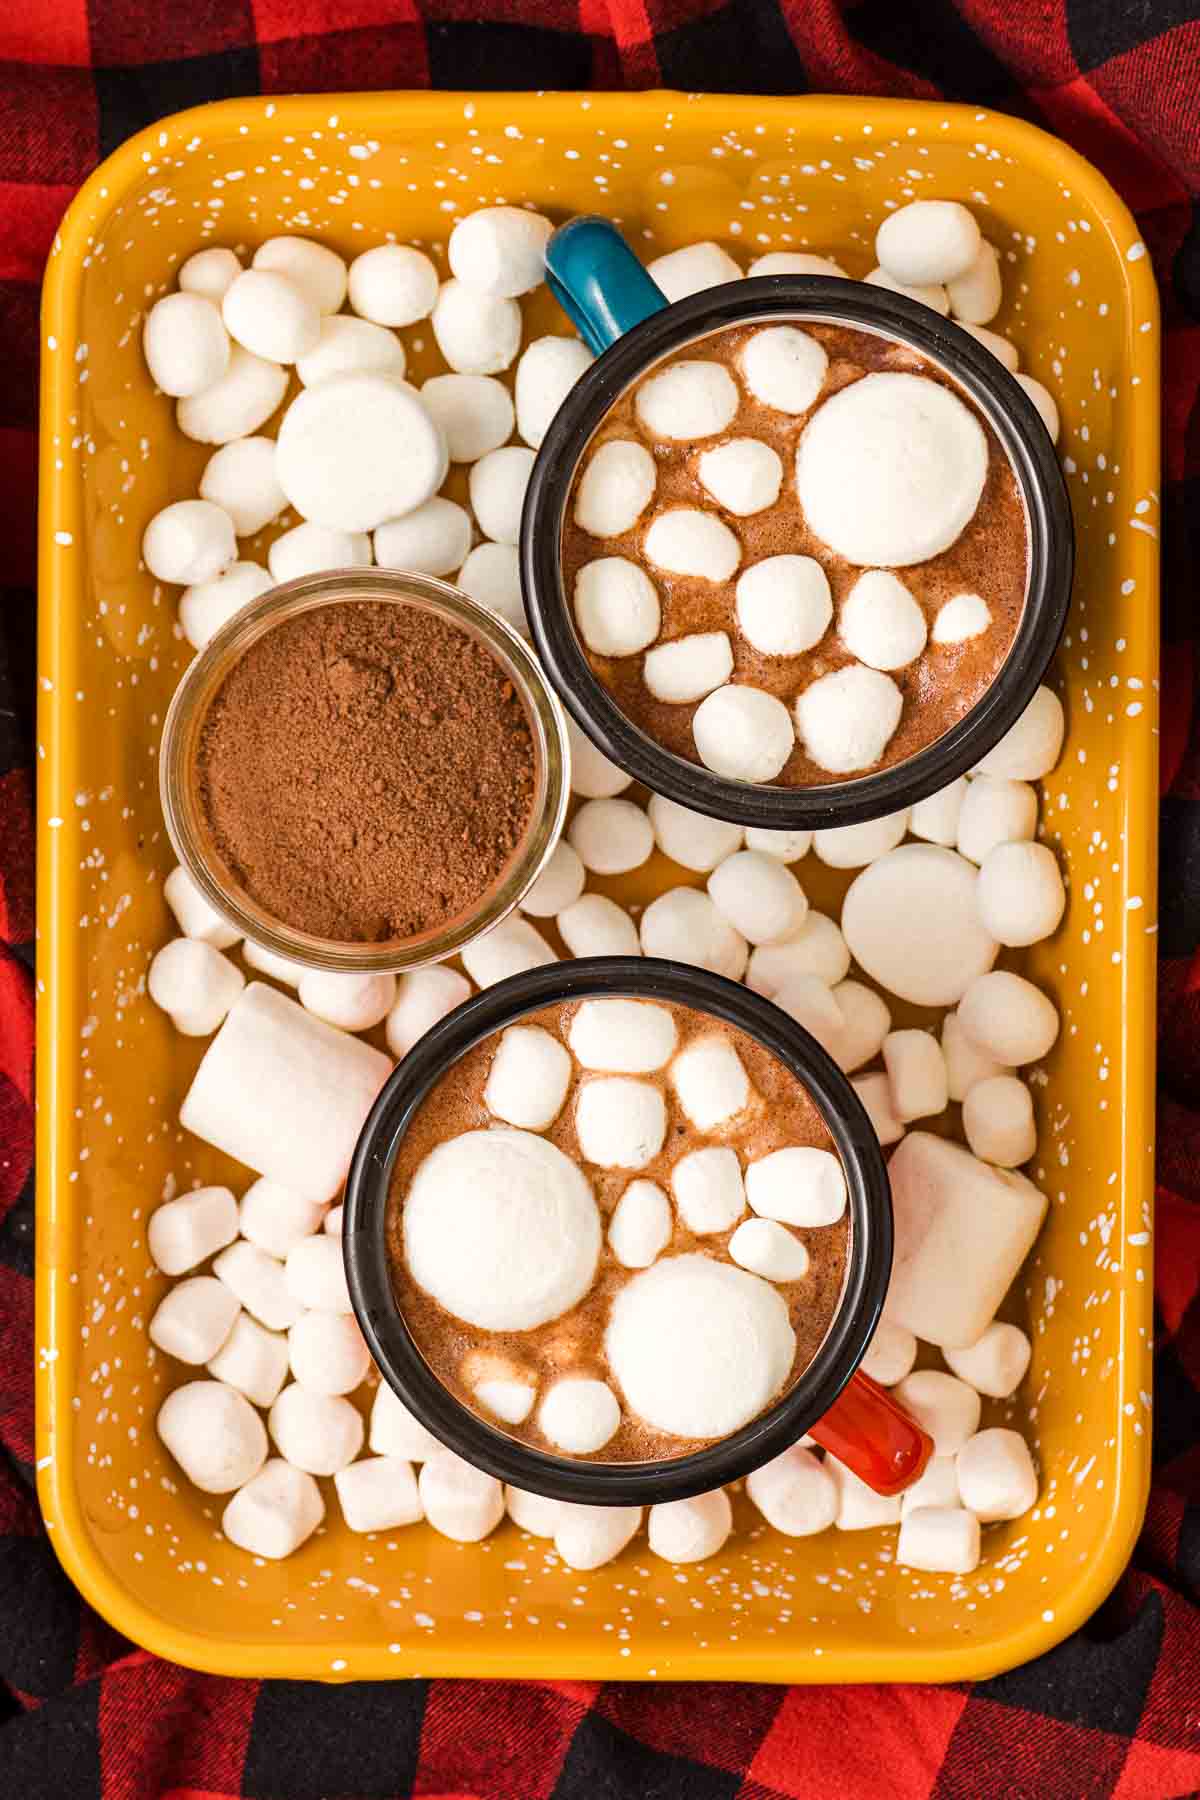 Two mugs of marshmallow-topped hot cocoa, one in a blue mug and one in a red mug, on a yellow tray with a jar of hot cocoa mix and more marshmallows.